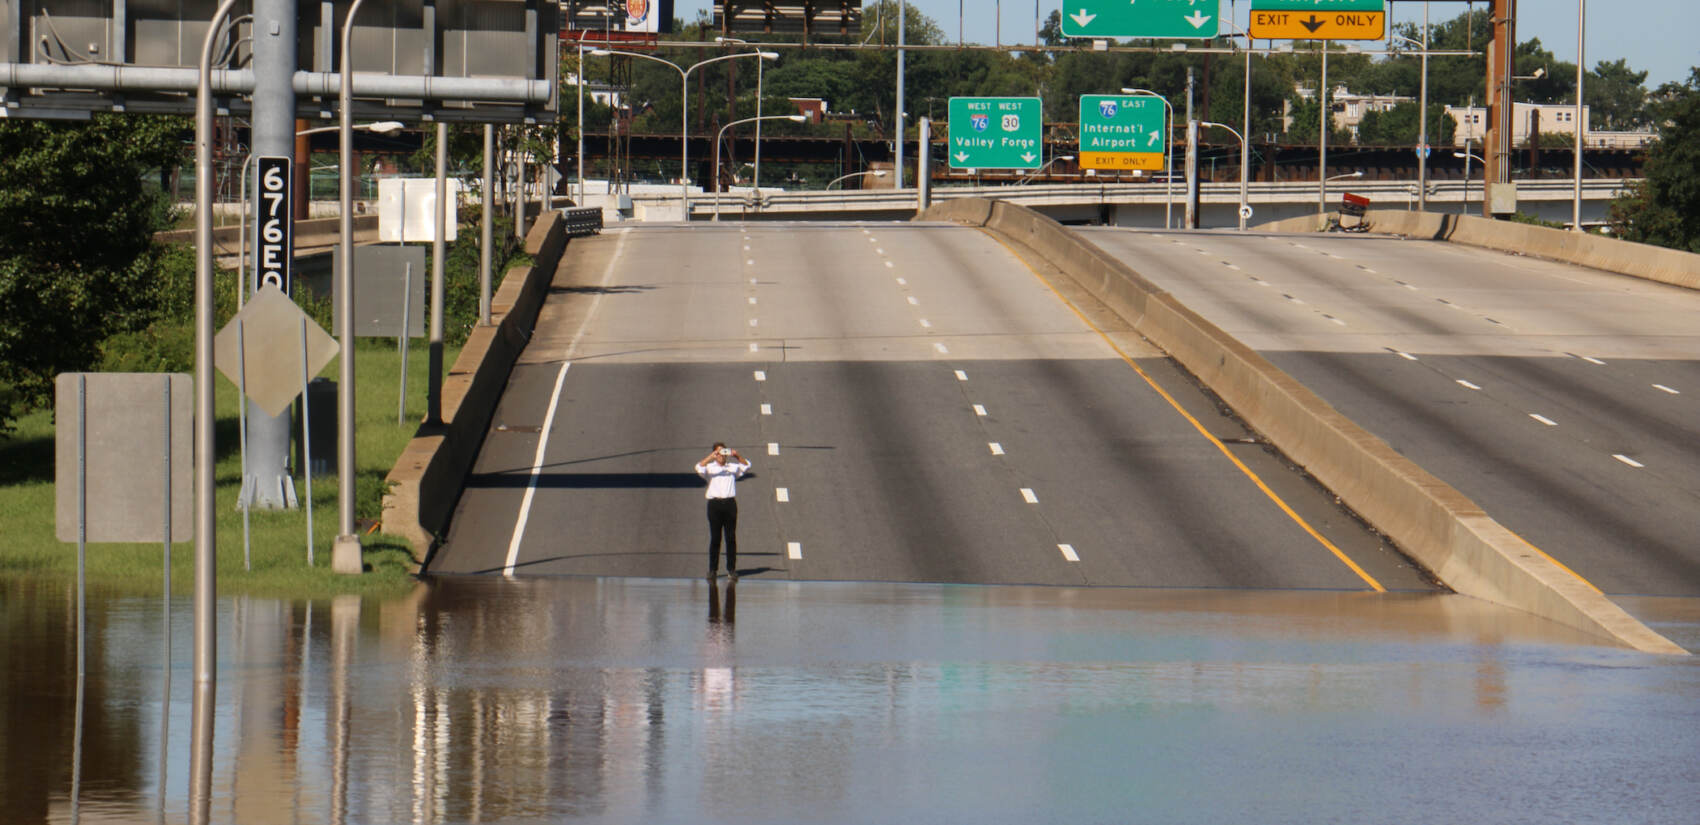 Flooding caused by the remnants of Hurricane Ida closed the Vine Street Expressway. (Emma Lee/WHYY)